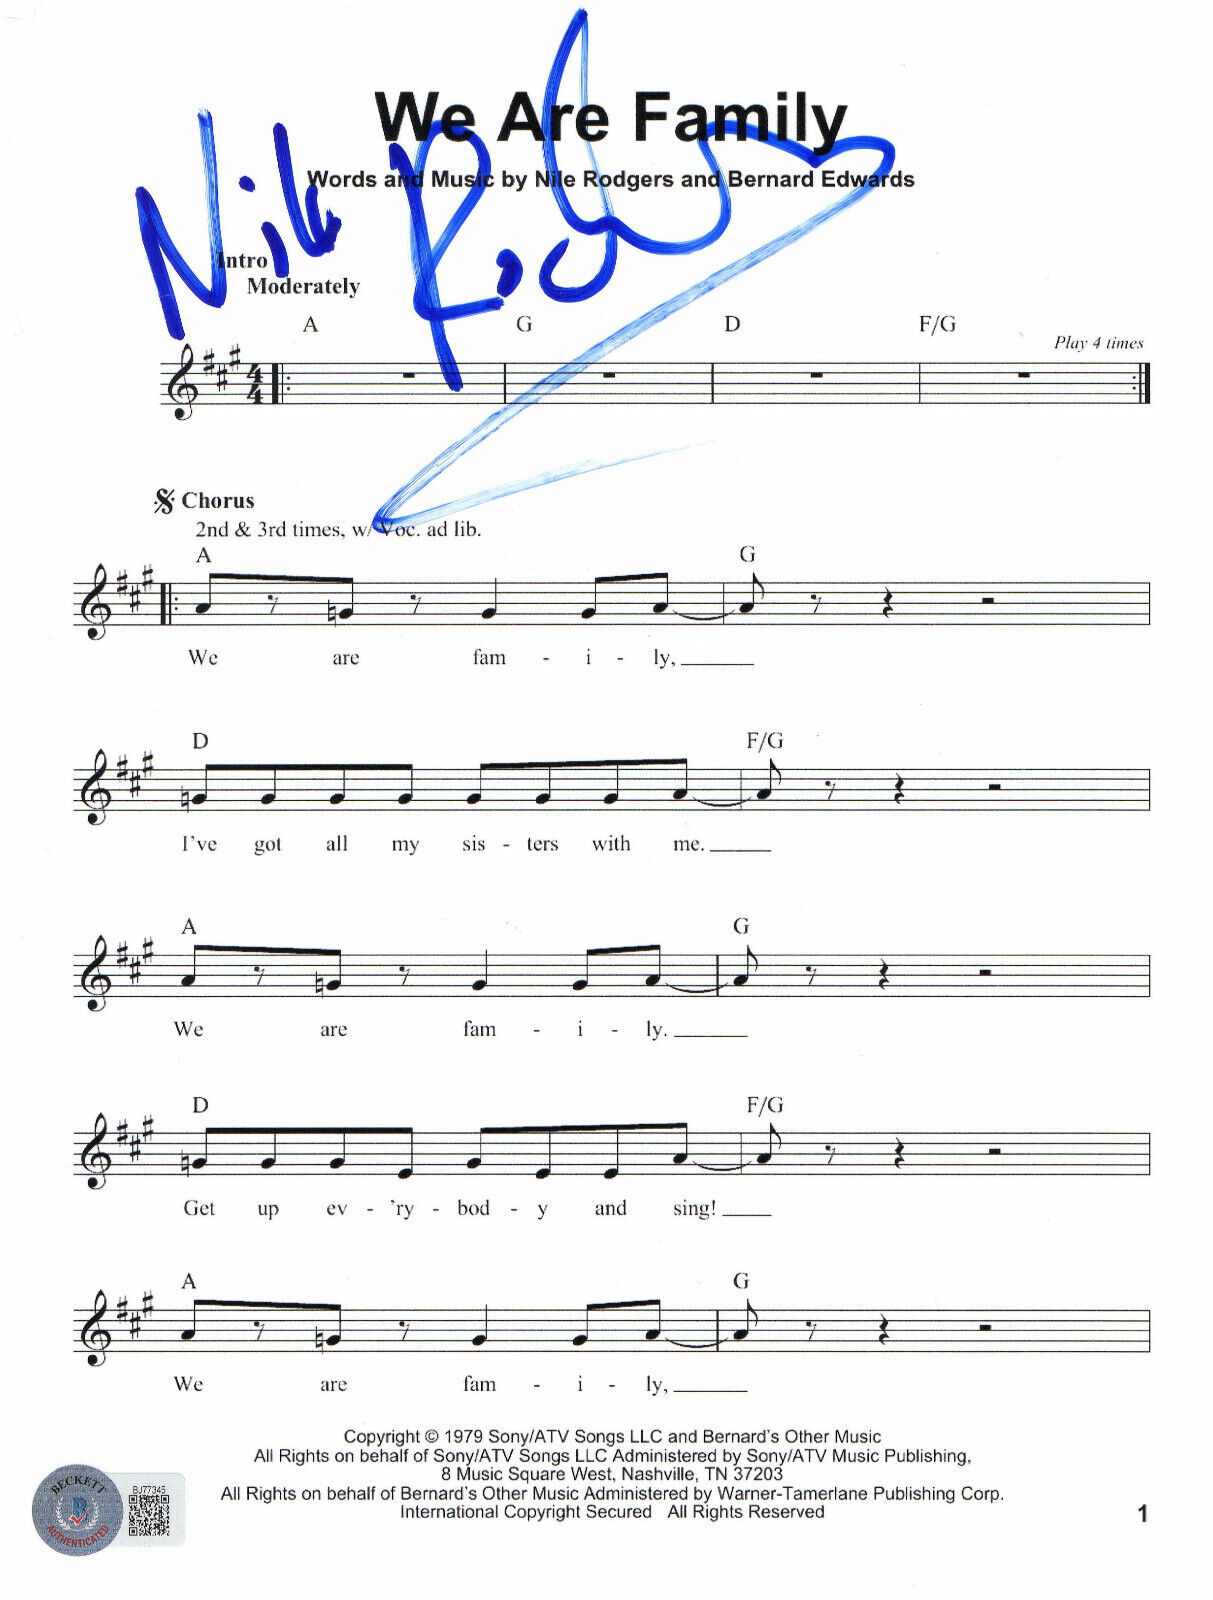 NILE RODGERS SIGNED AUTOGRAPH WE ARE FAMILY MUSIC SHEET BECKETT BAS CHIC